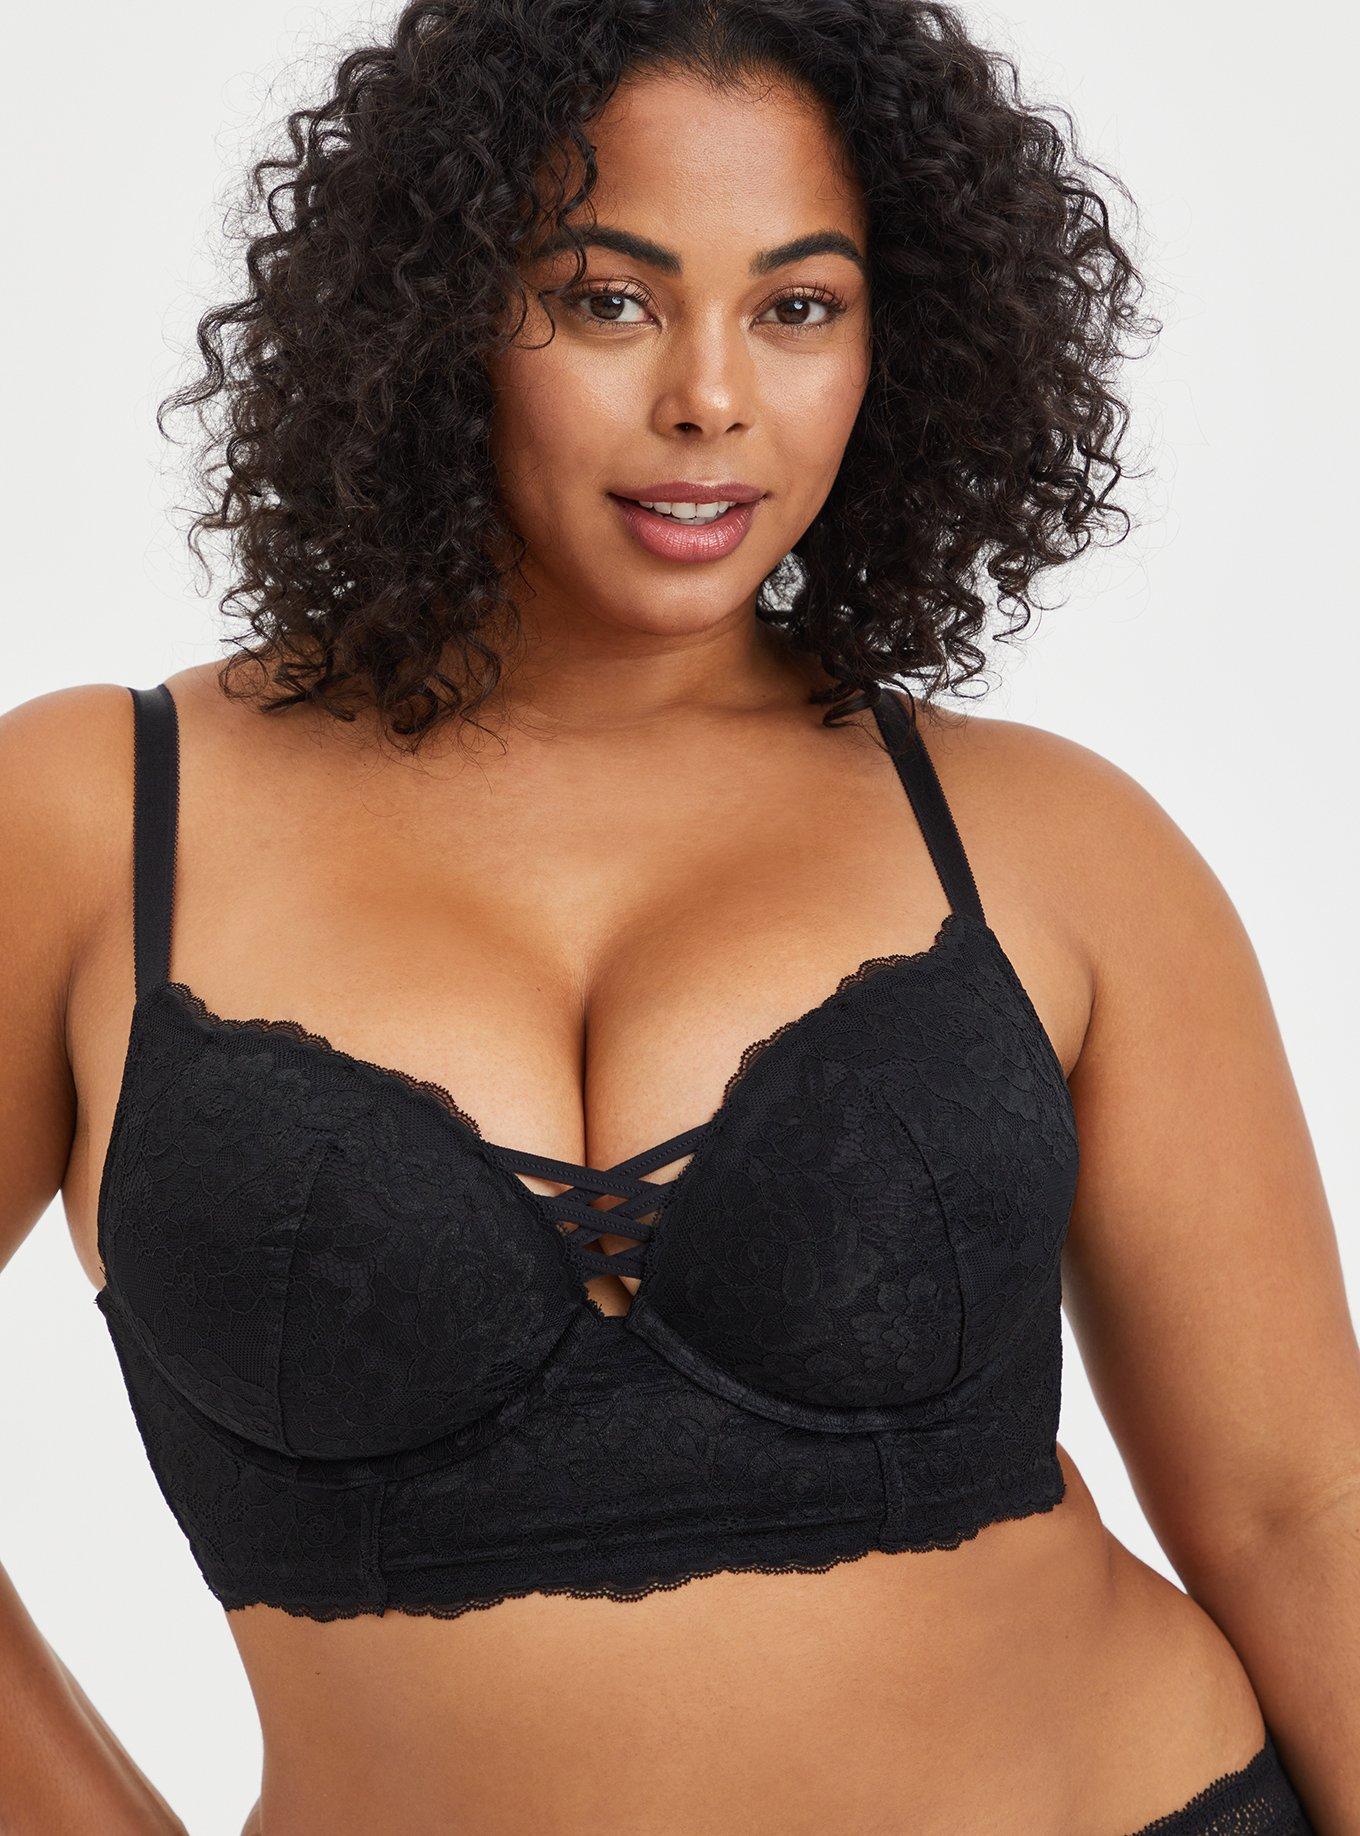 32 34 36 38 B C VERY SEXY CLEAVAGE BODY ADD Two 2 CUP Sizes Double Push Up  BRA